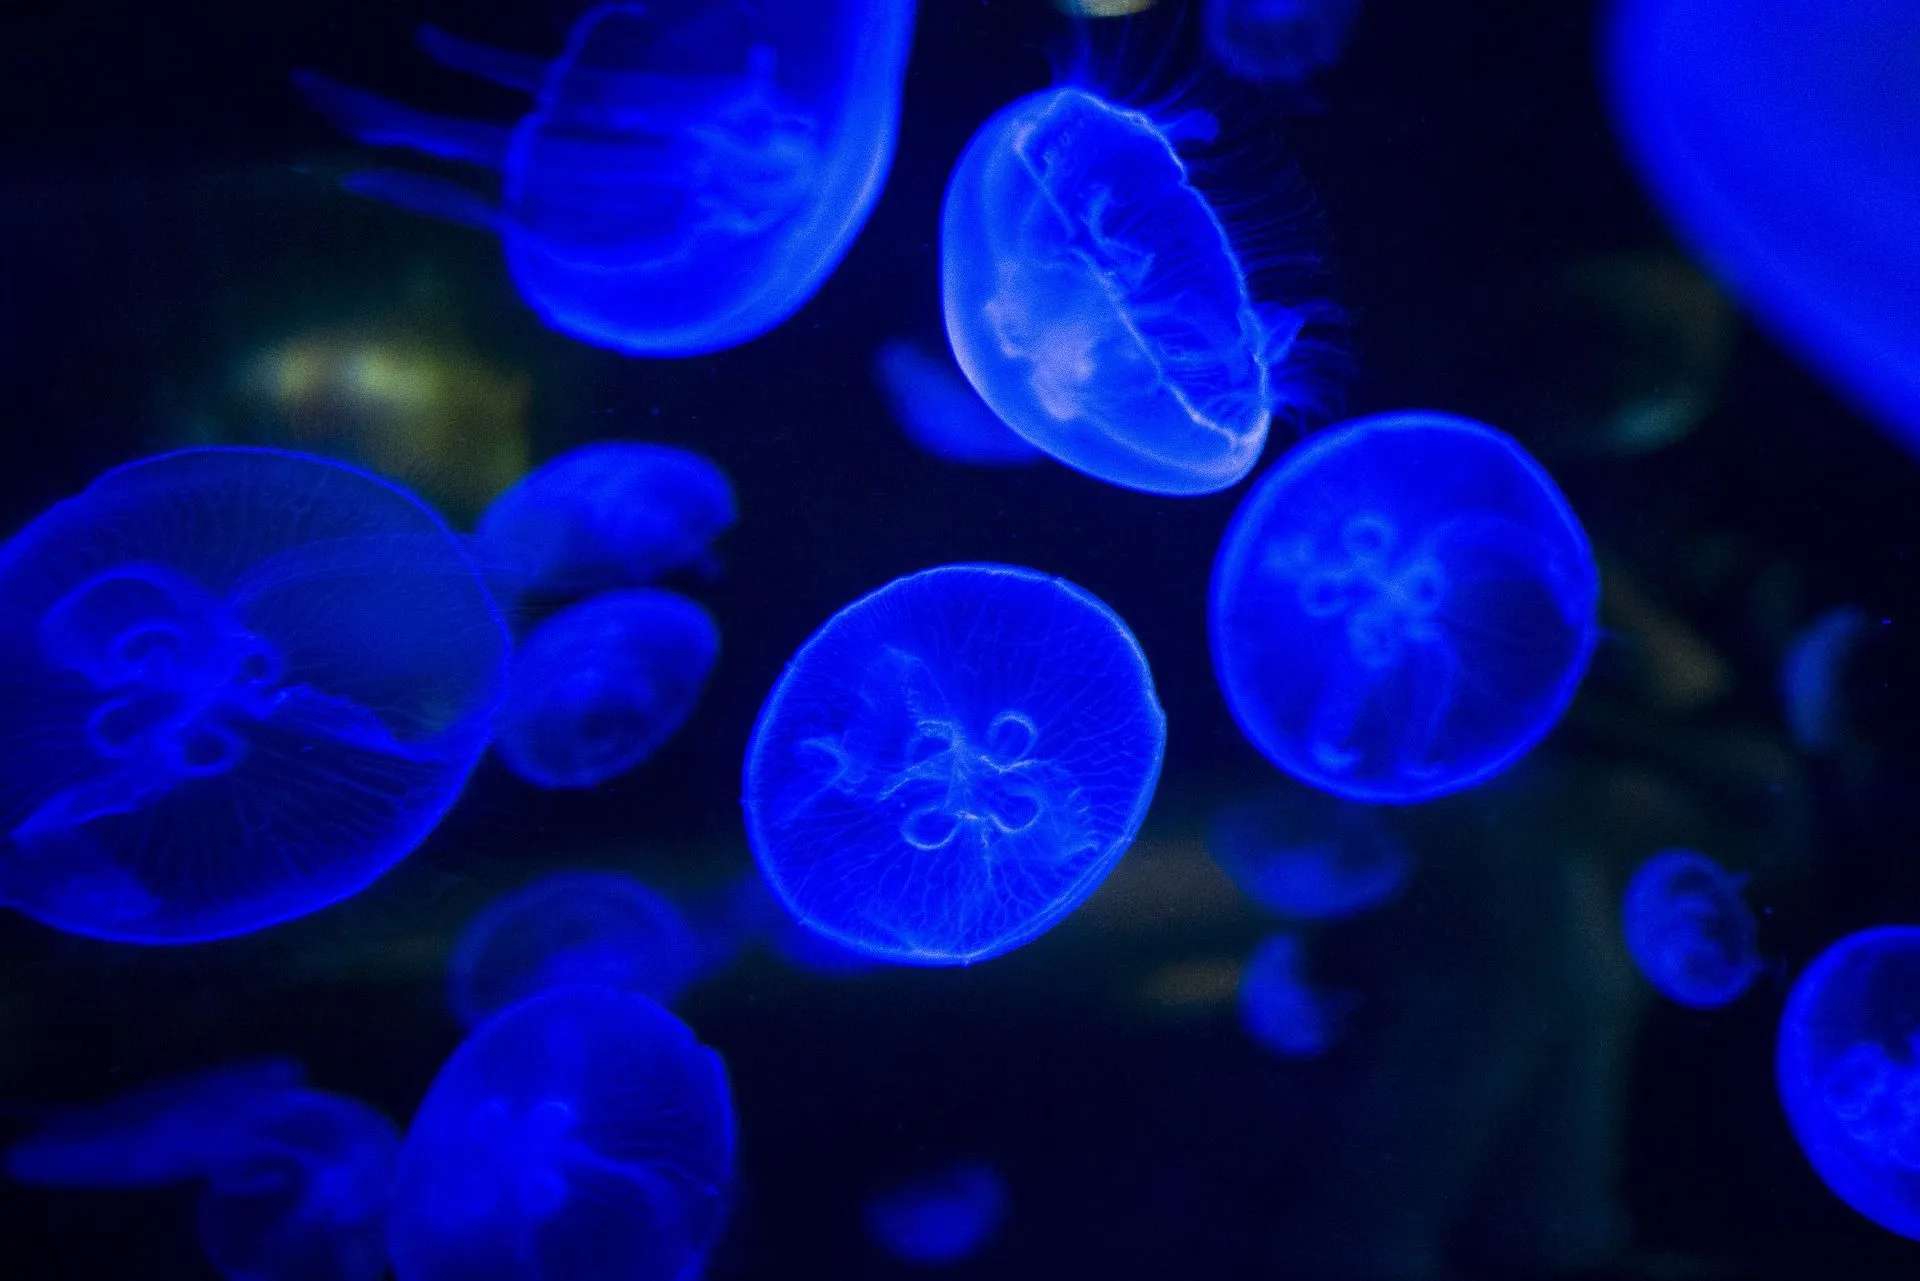 Do you think we humans can glow like the growing sea jellies. Read all about bioluminescence in humans here.